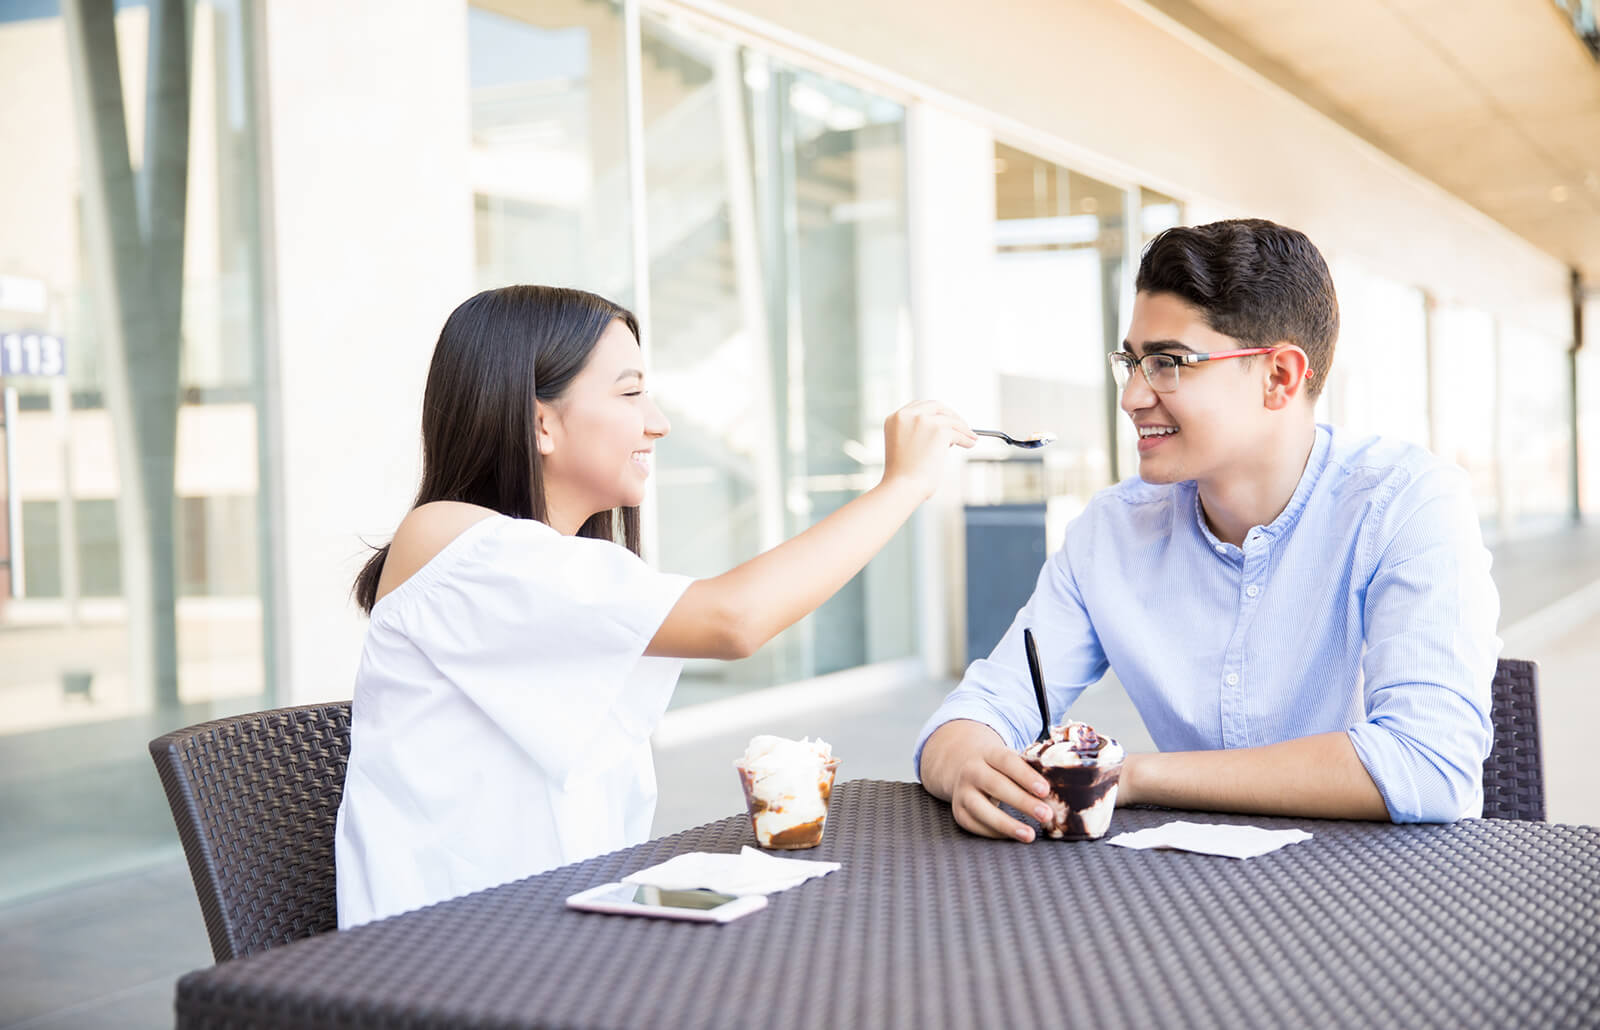 How To Ask For A Second Date (Doing it The Right Way)